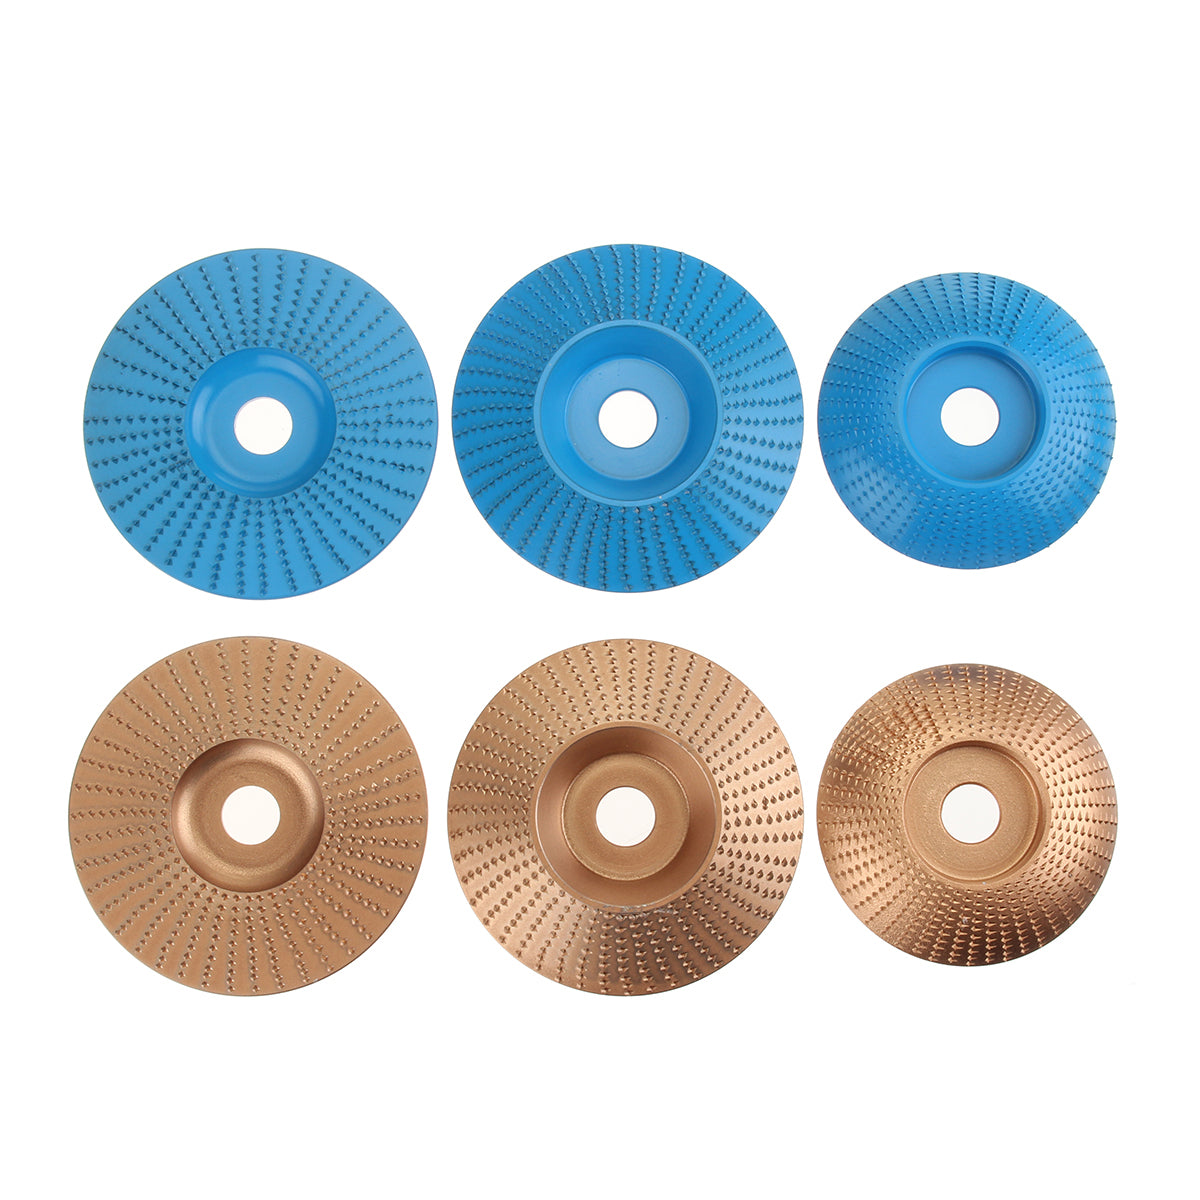 Wood Grinding Wheel Rotary Disc Sanding Wood Carving Disc Tool Abrasive Disc Shaping Tool for Angle Grinder